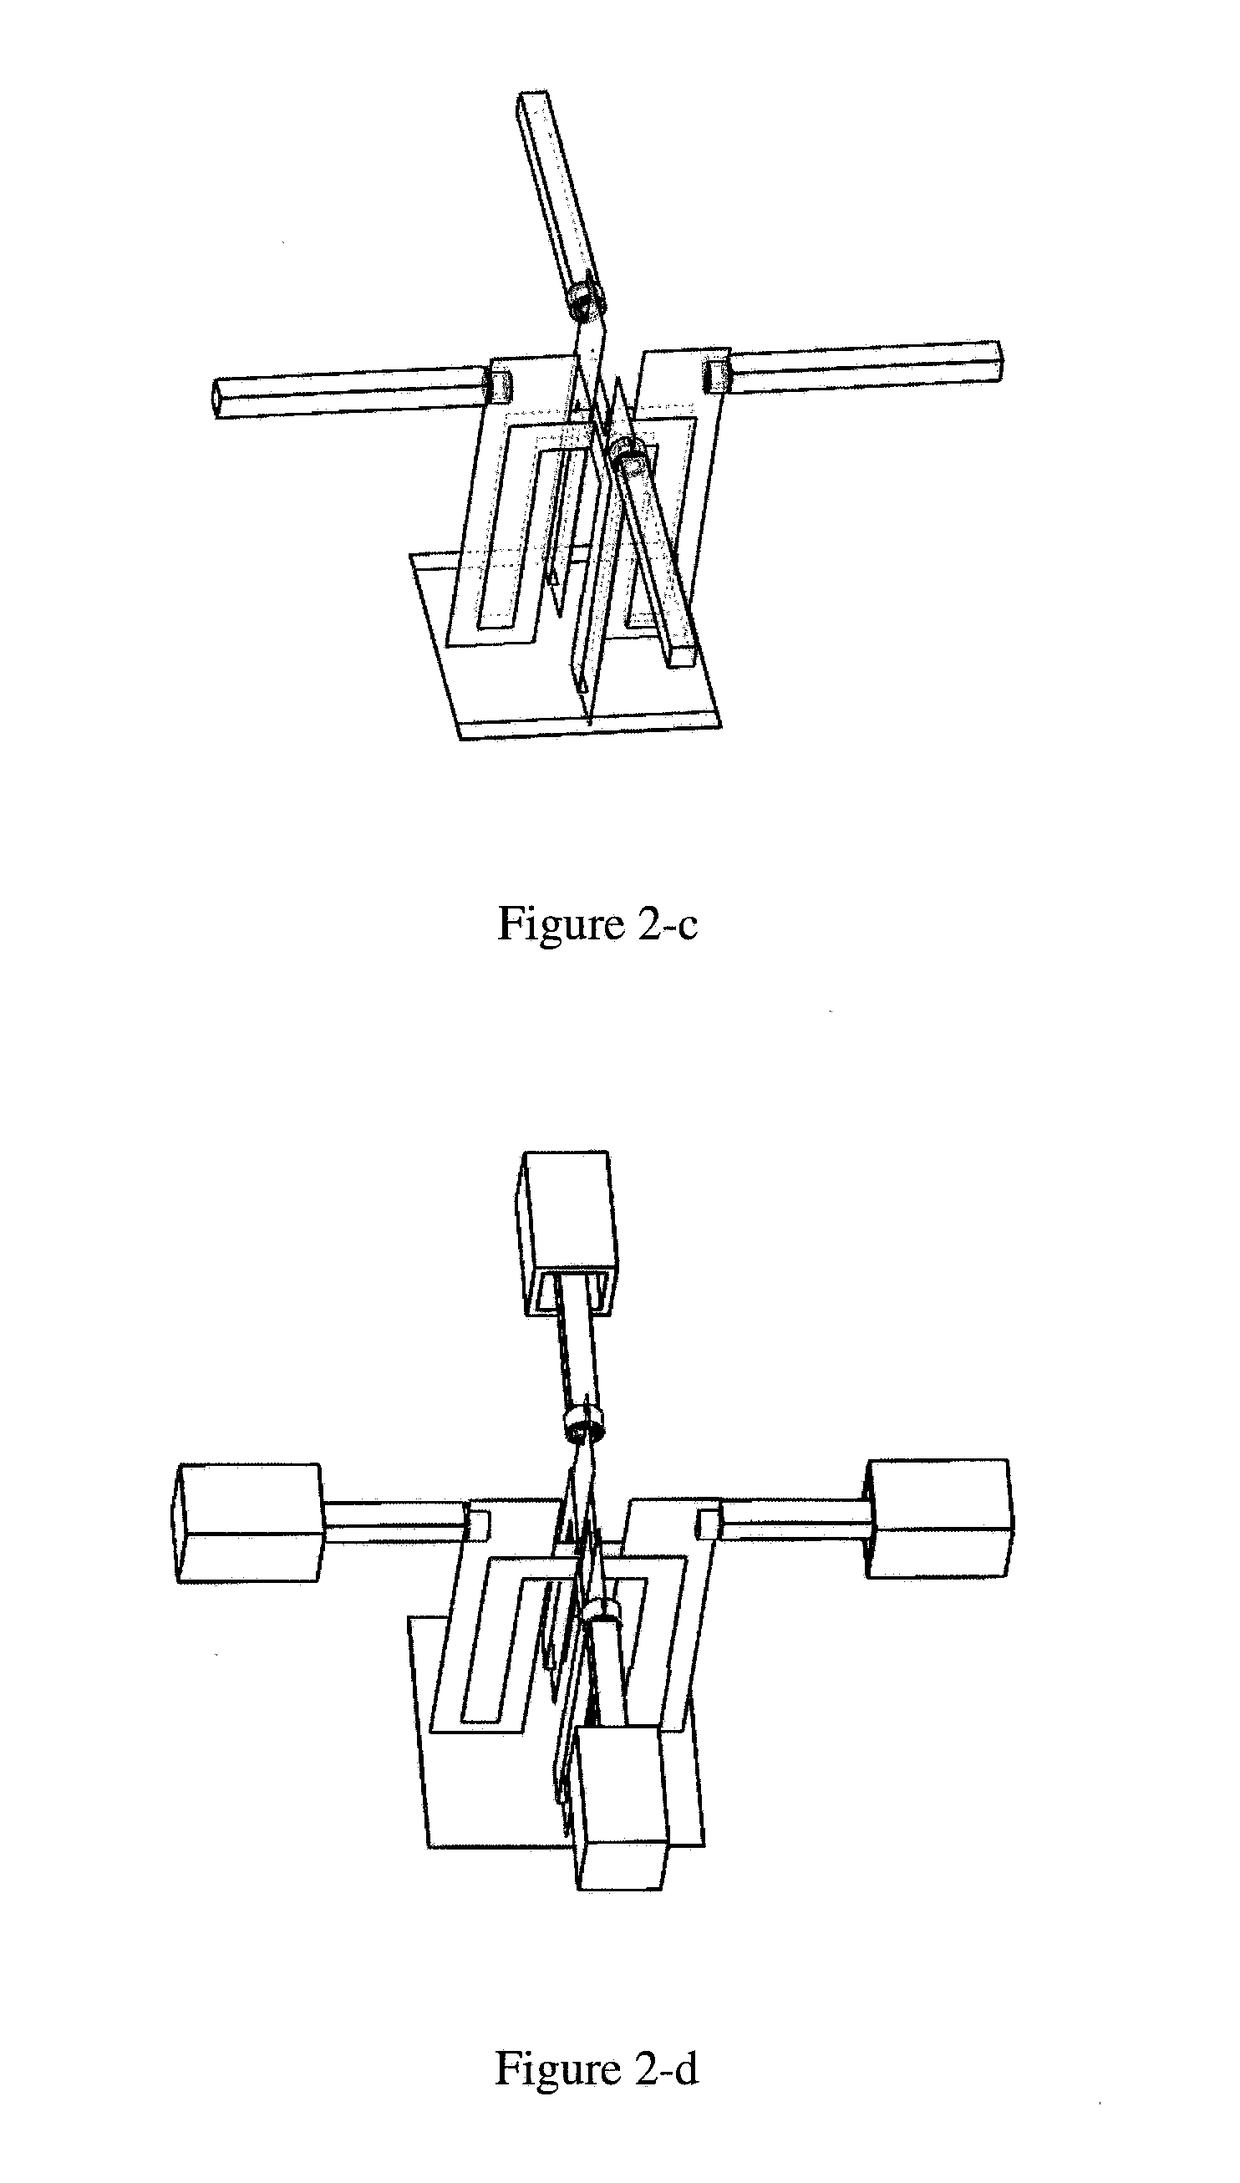 Low band dipole and multi-band multi-port antenna arrangement